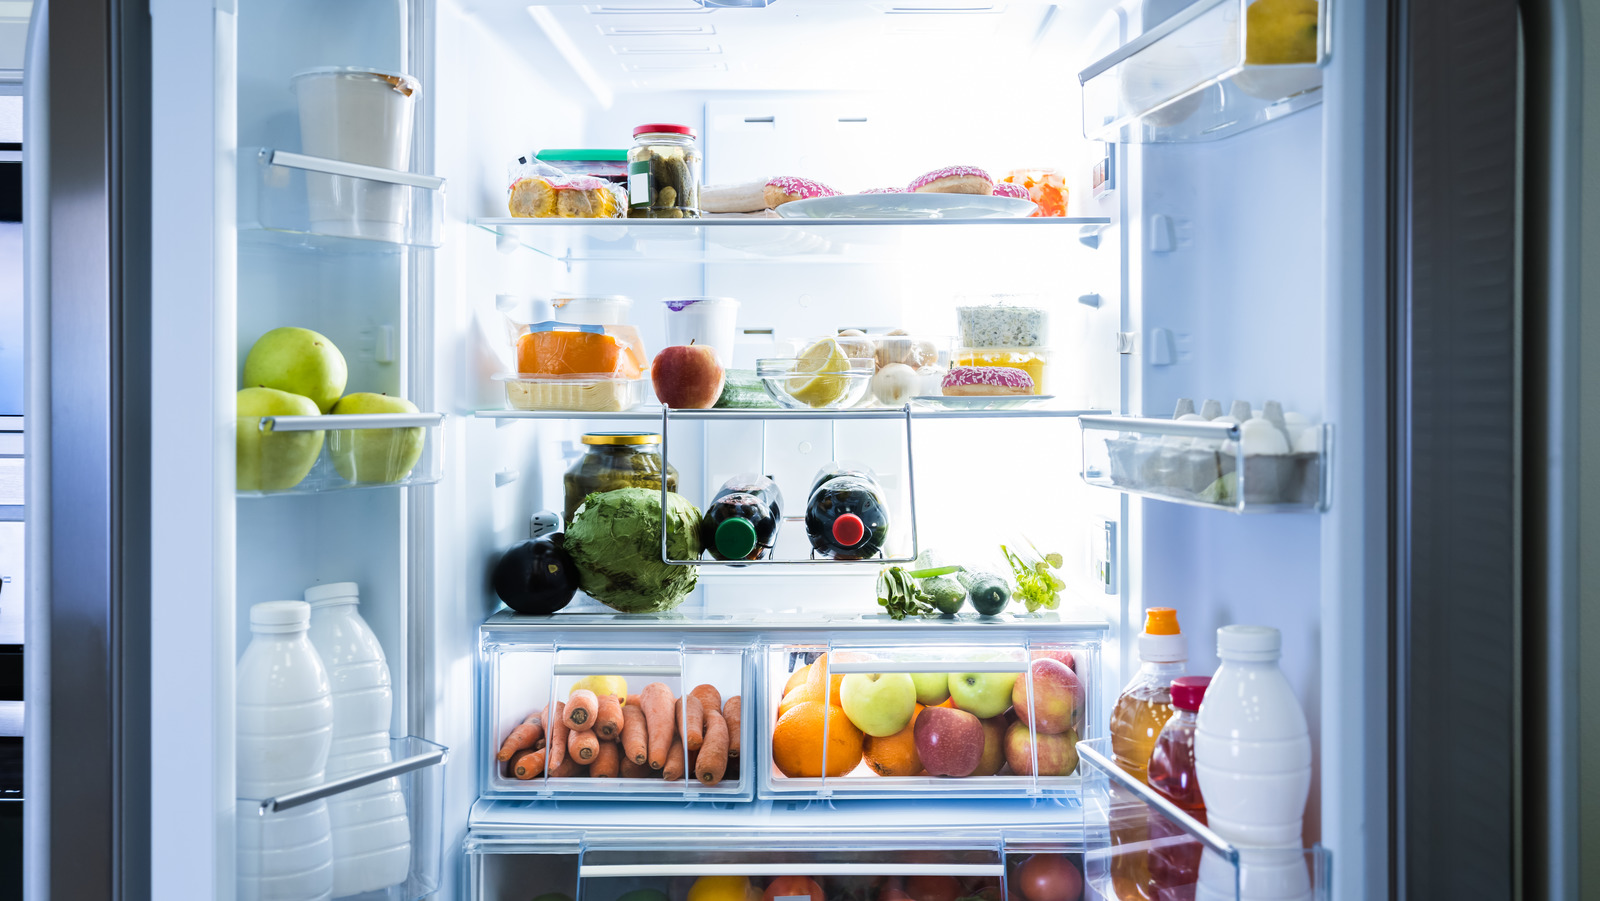 The Benefits of Maintaining an Organized Refrigerator